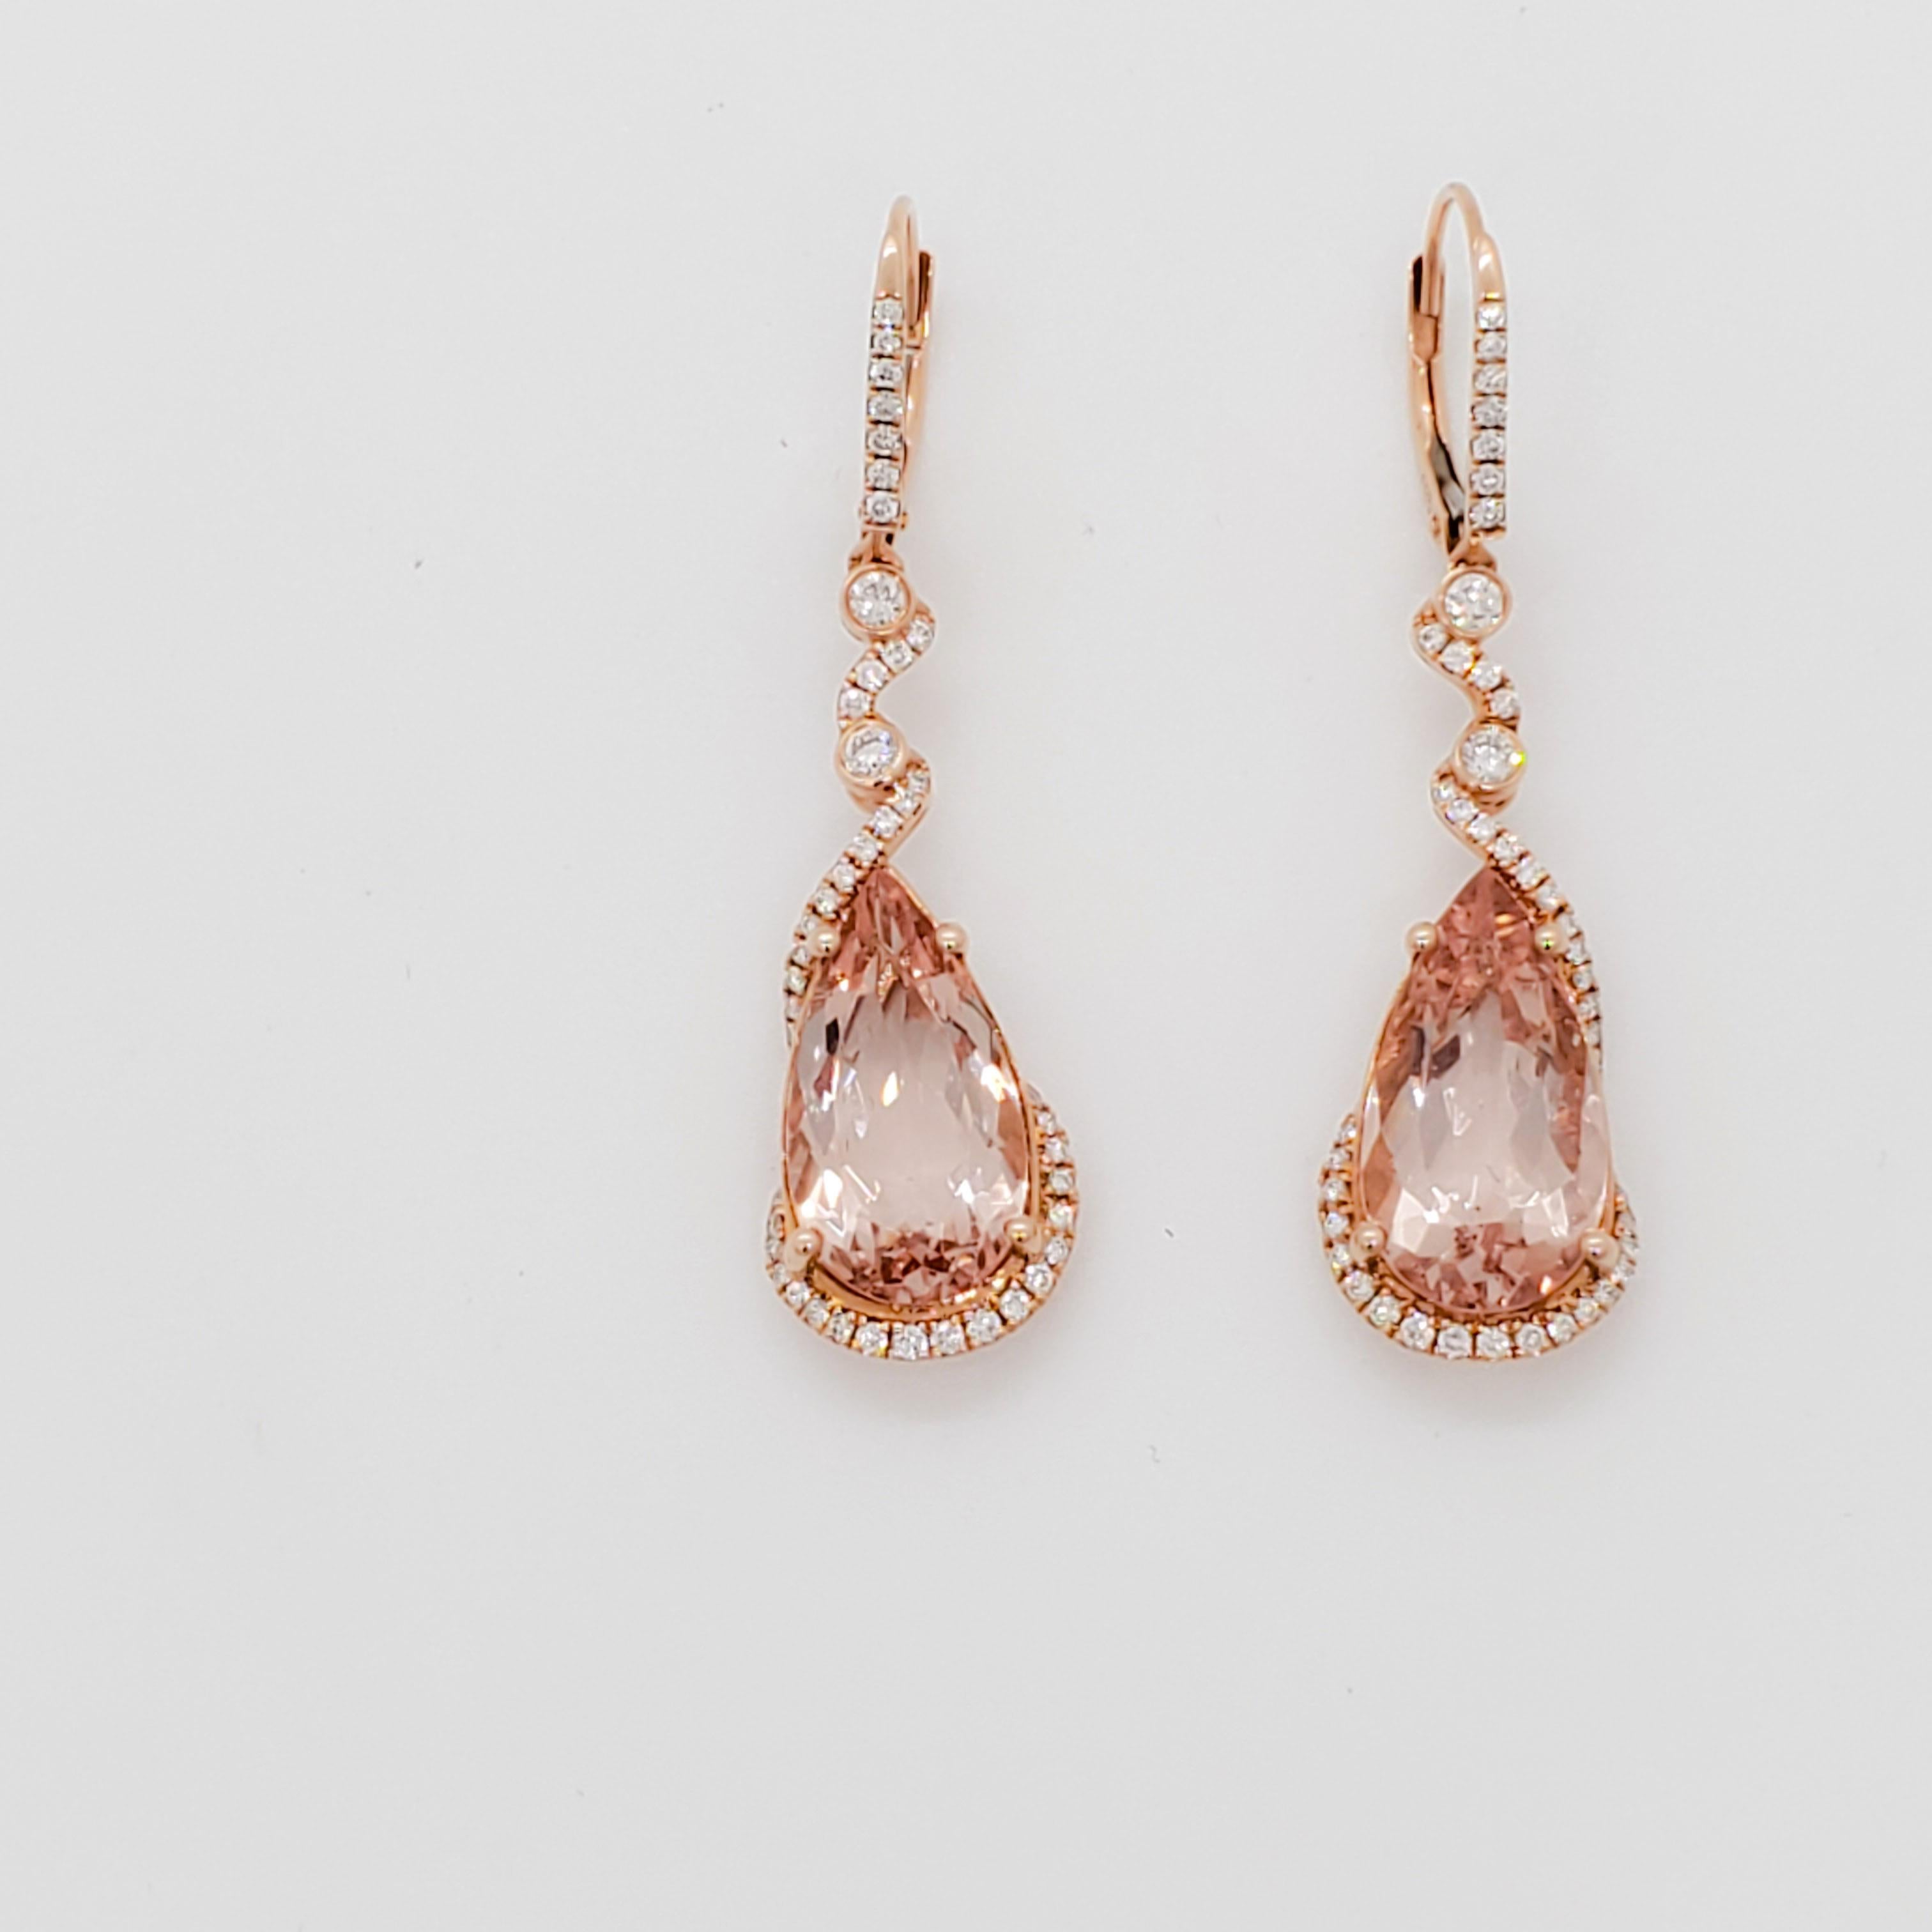 Gorgeous 9.54 ct. morganite pear shapes with 0.75 ct. good quality, white, and bright diamond rounds.  Handmade in 14k rose gold.  These earrings are classy and chic.